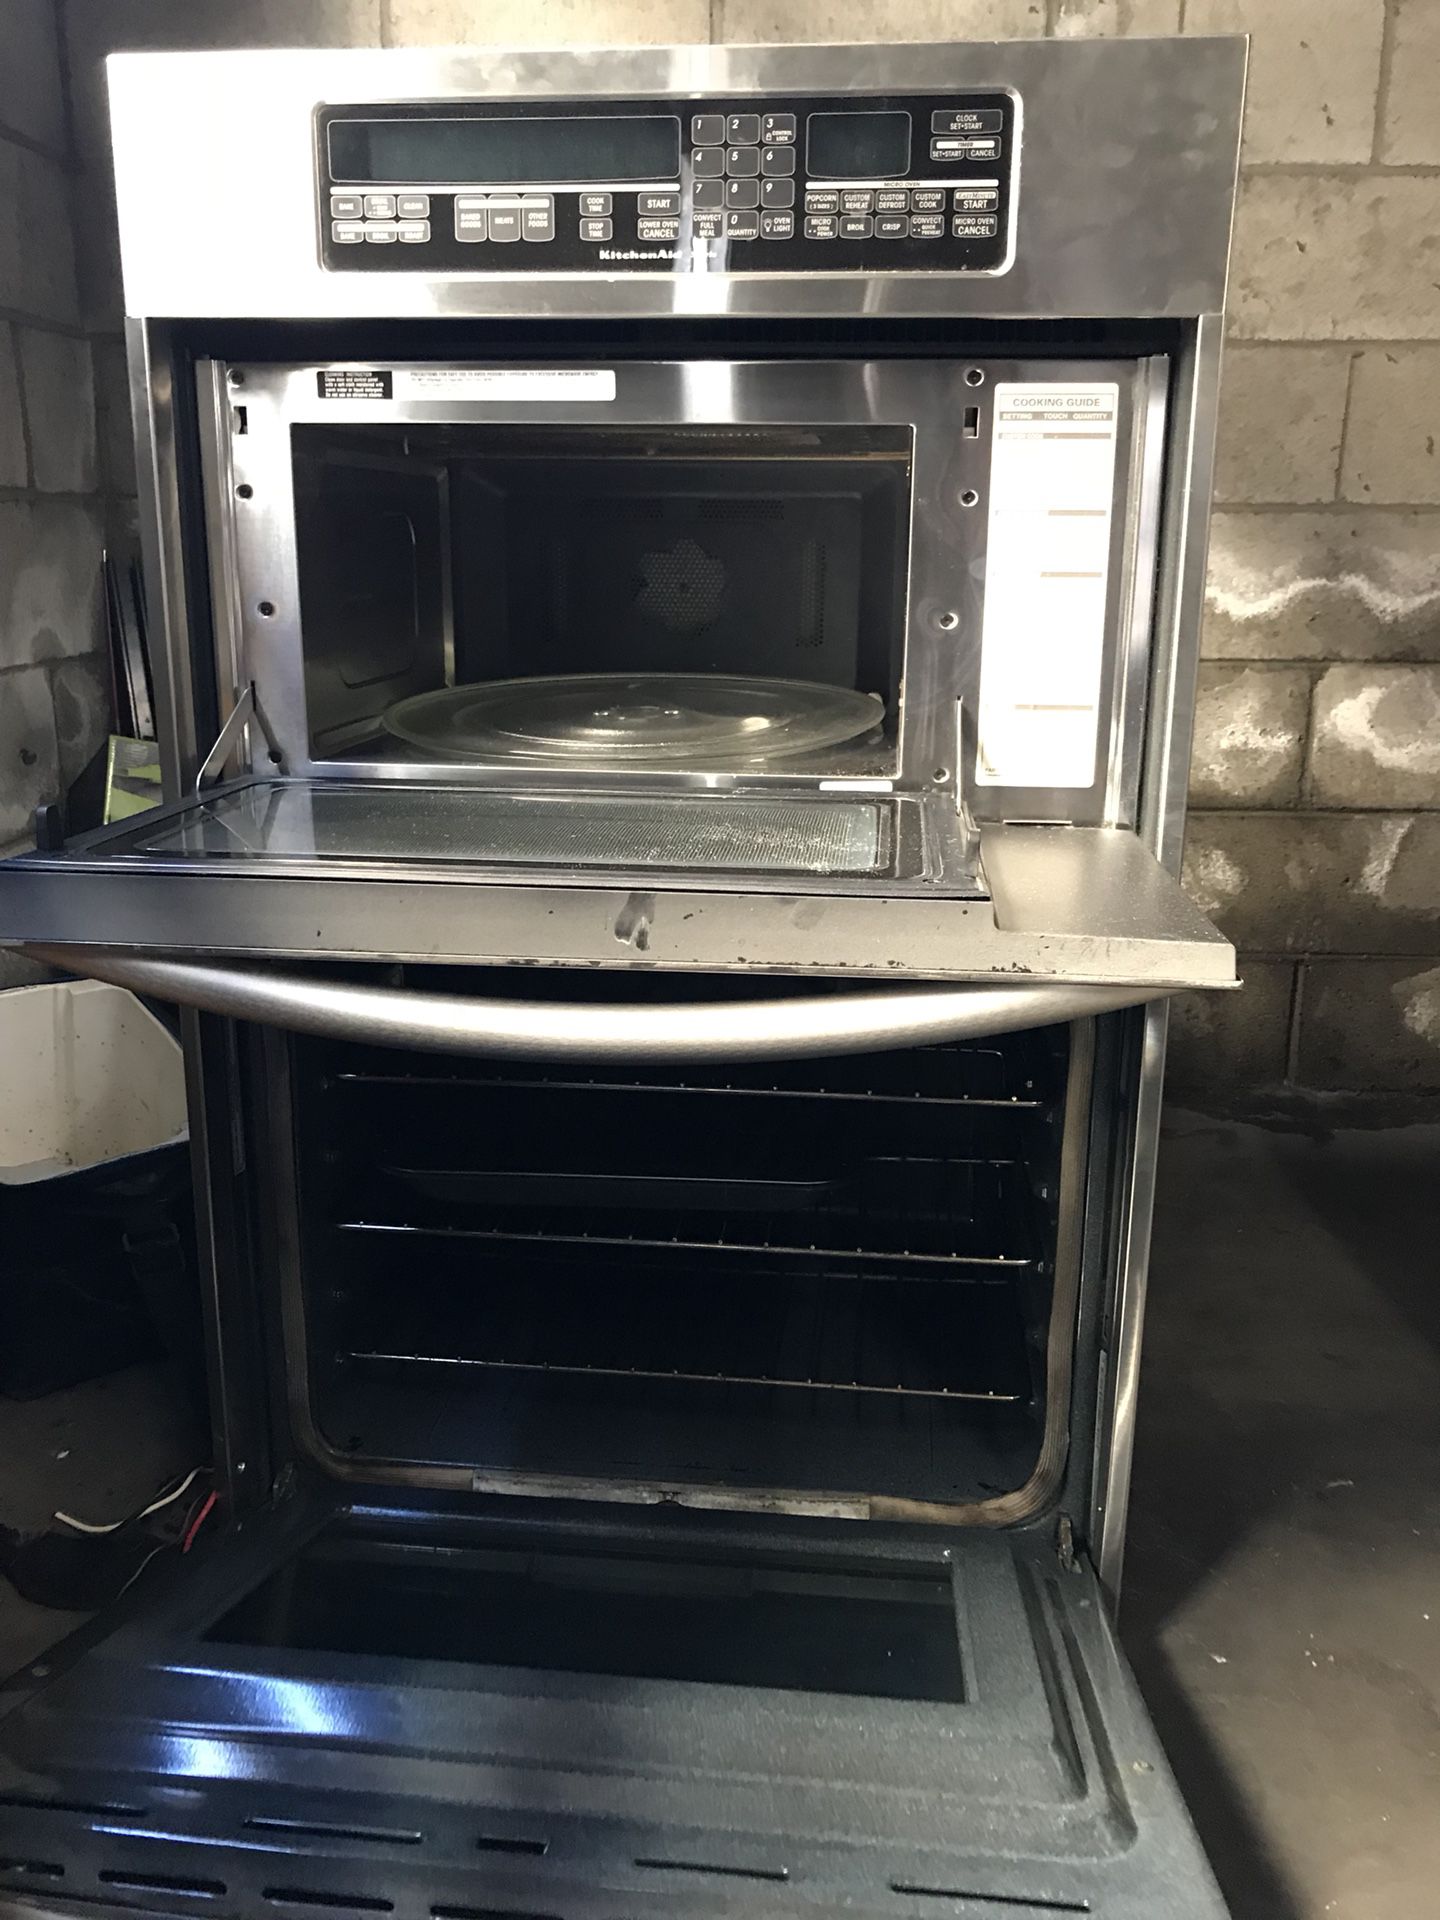 KitchenAid microwave/oven $1000 electric not gas